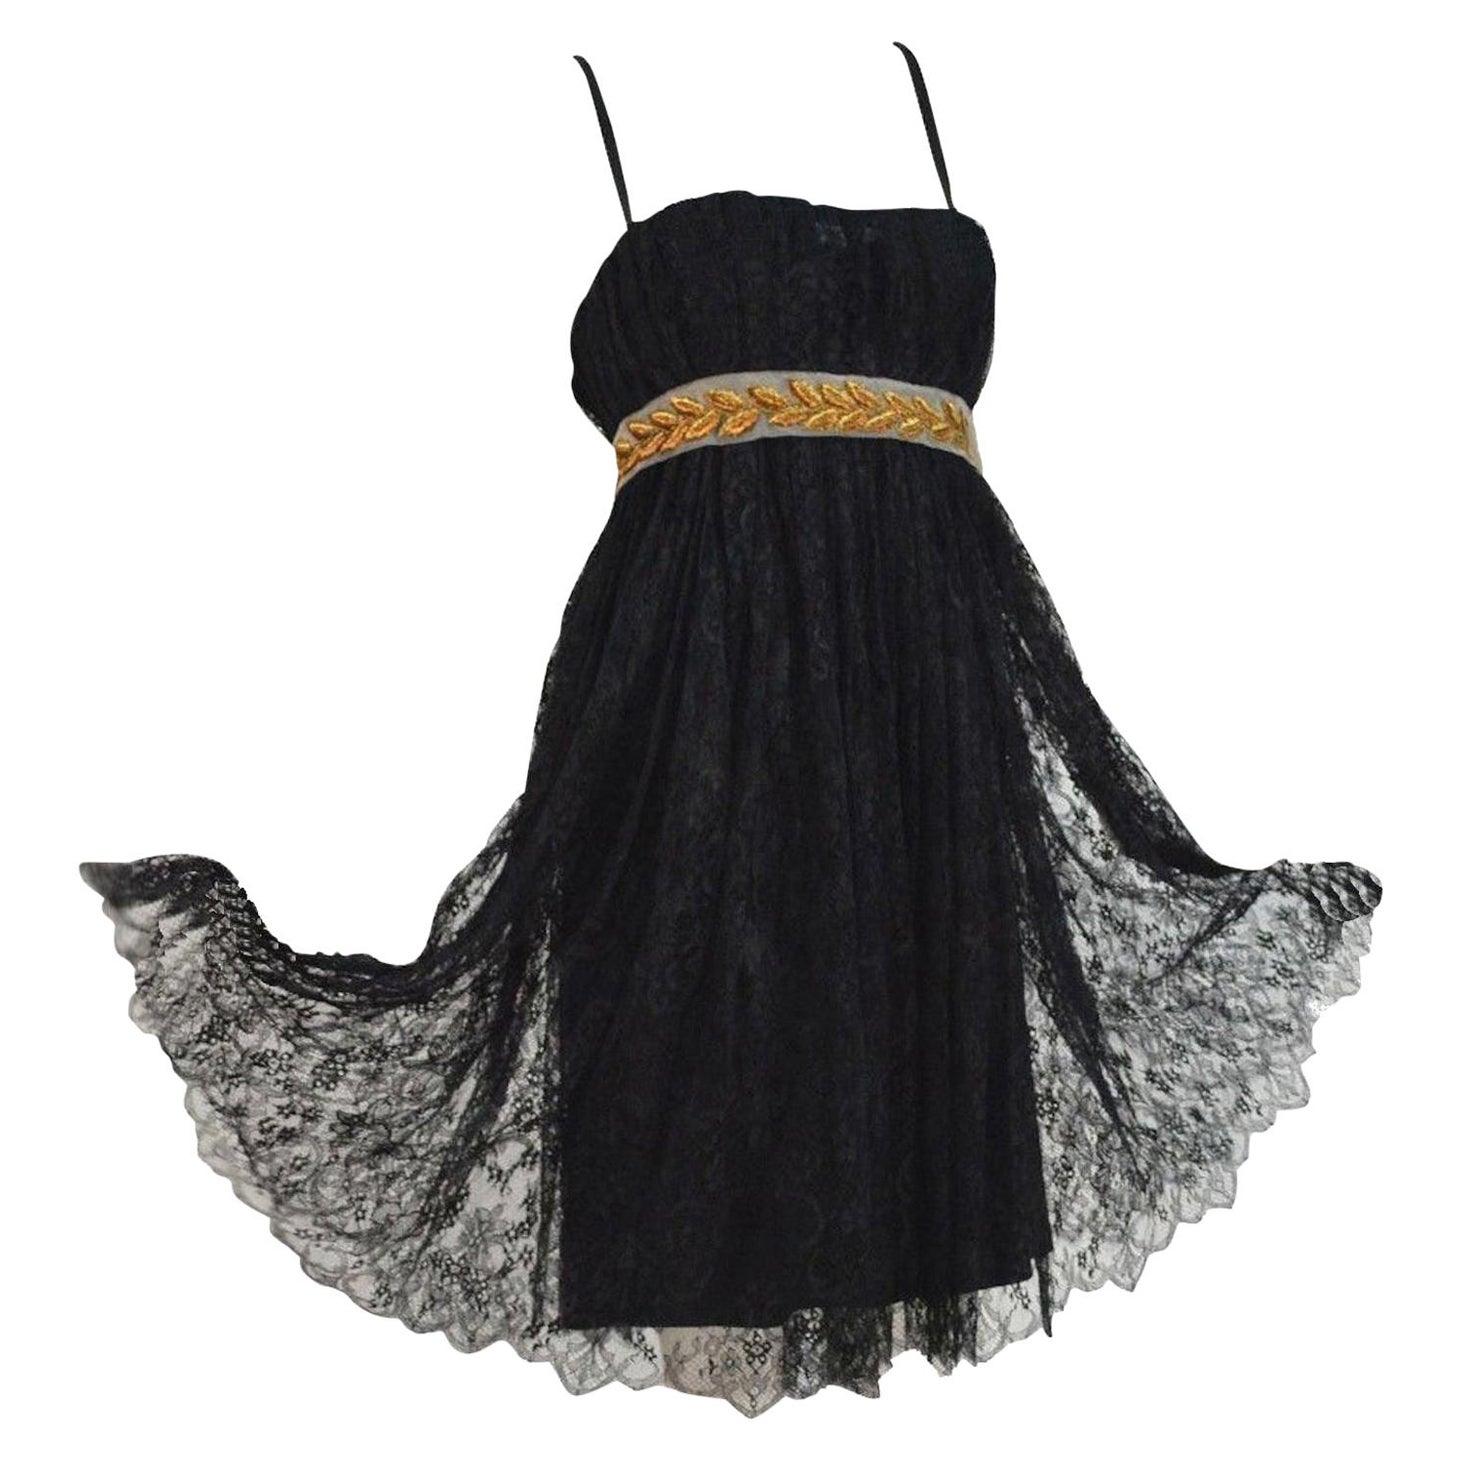 UNWORN Dolce & Gabbana Black Corset French Lace Laurel Evening Cocktail Dress 44 In Good Condition For Sale In Switzerland, CH